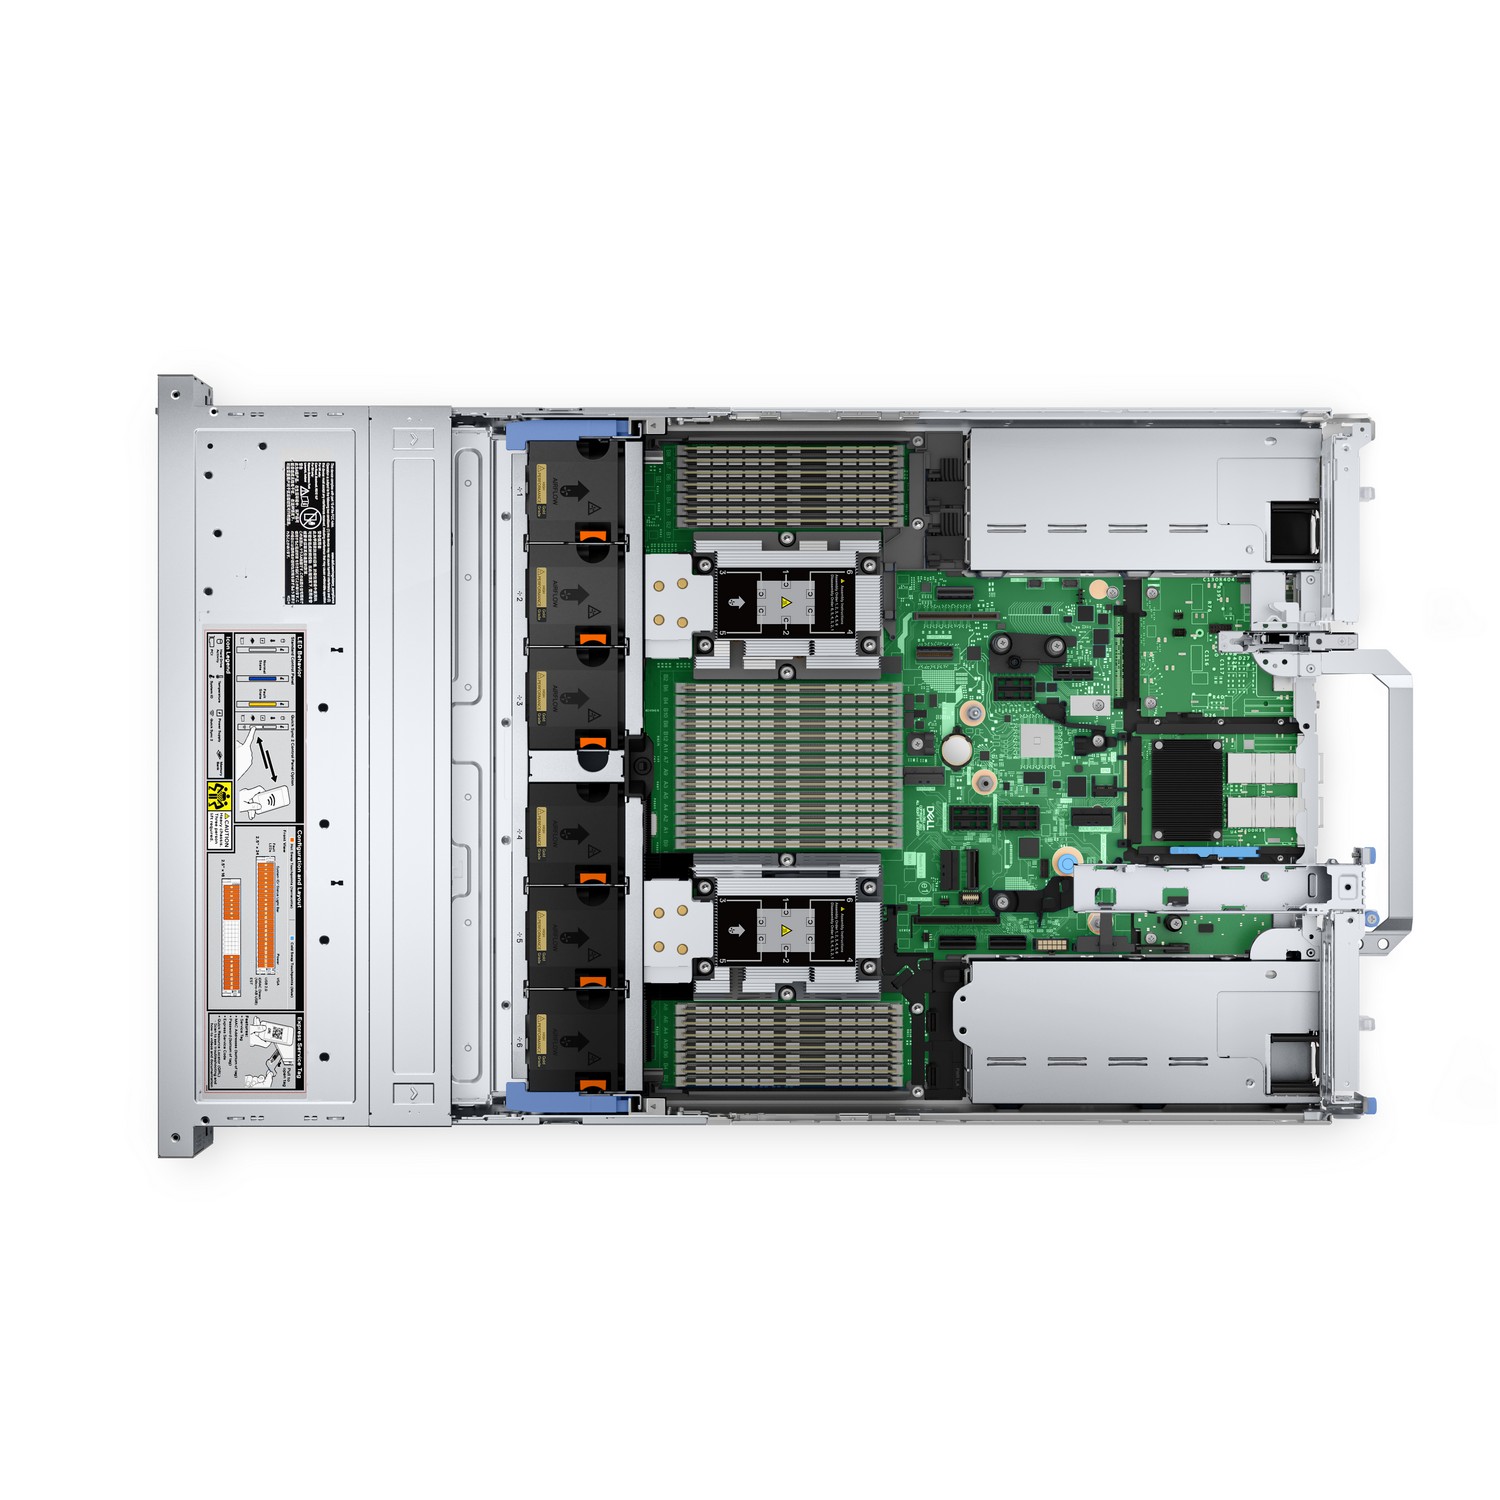 dell-per7625-e3-internal-chassis-with-air-shroud